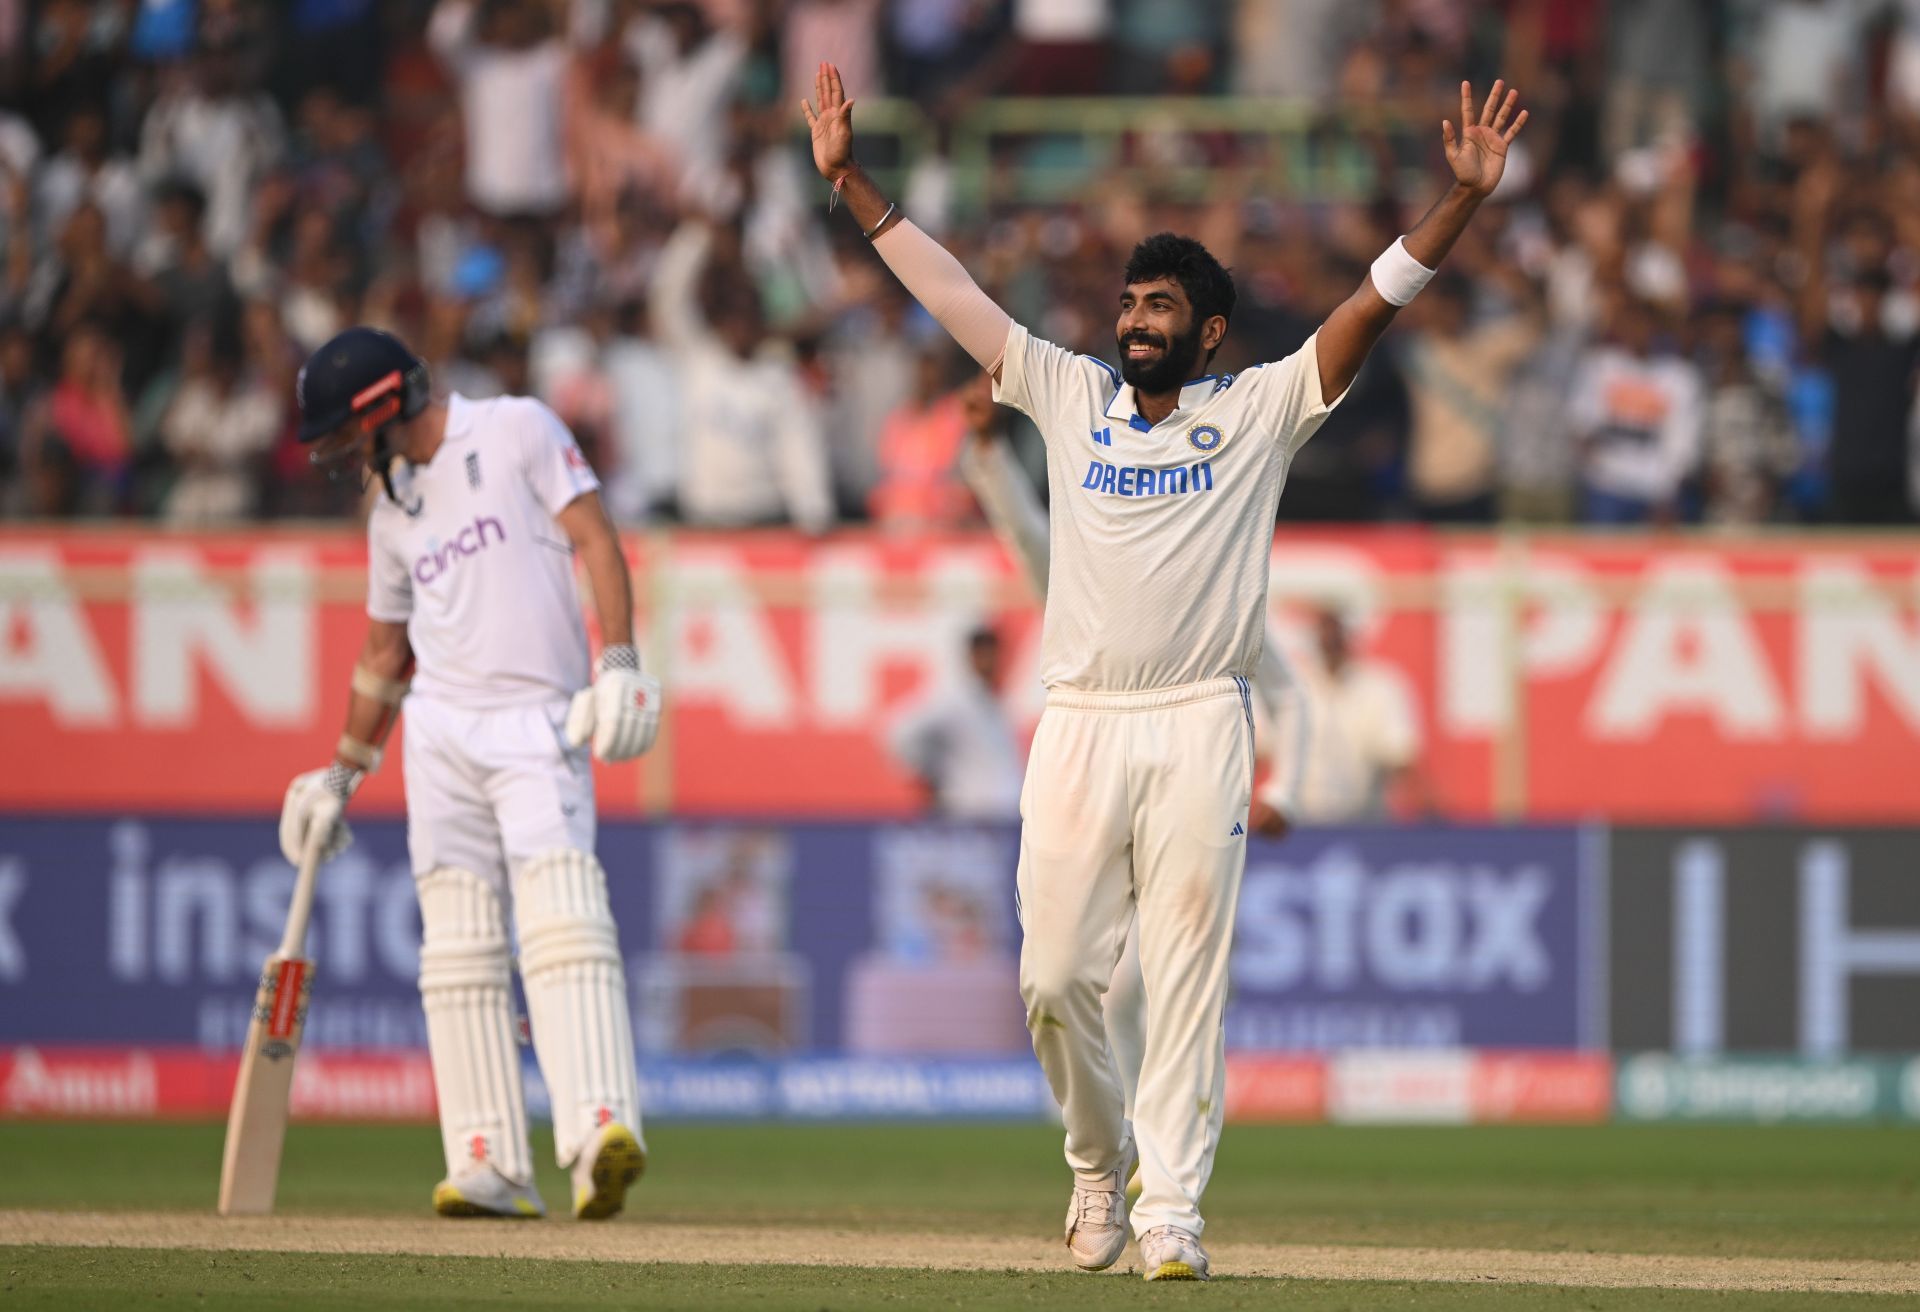 Jasprit Bumrah produced a spell for the ages to help India take the ascendancy in the Test. (Pic: Getty)